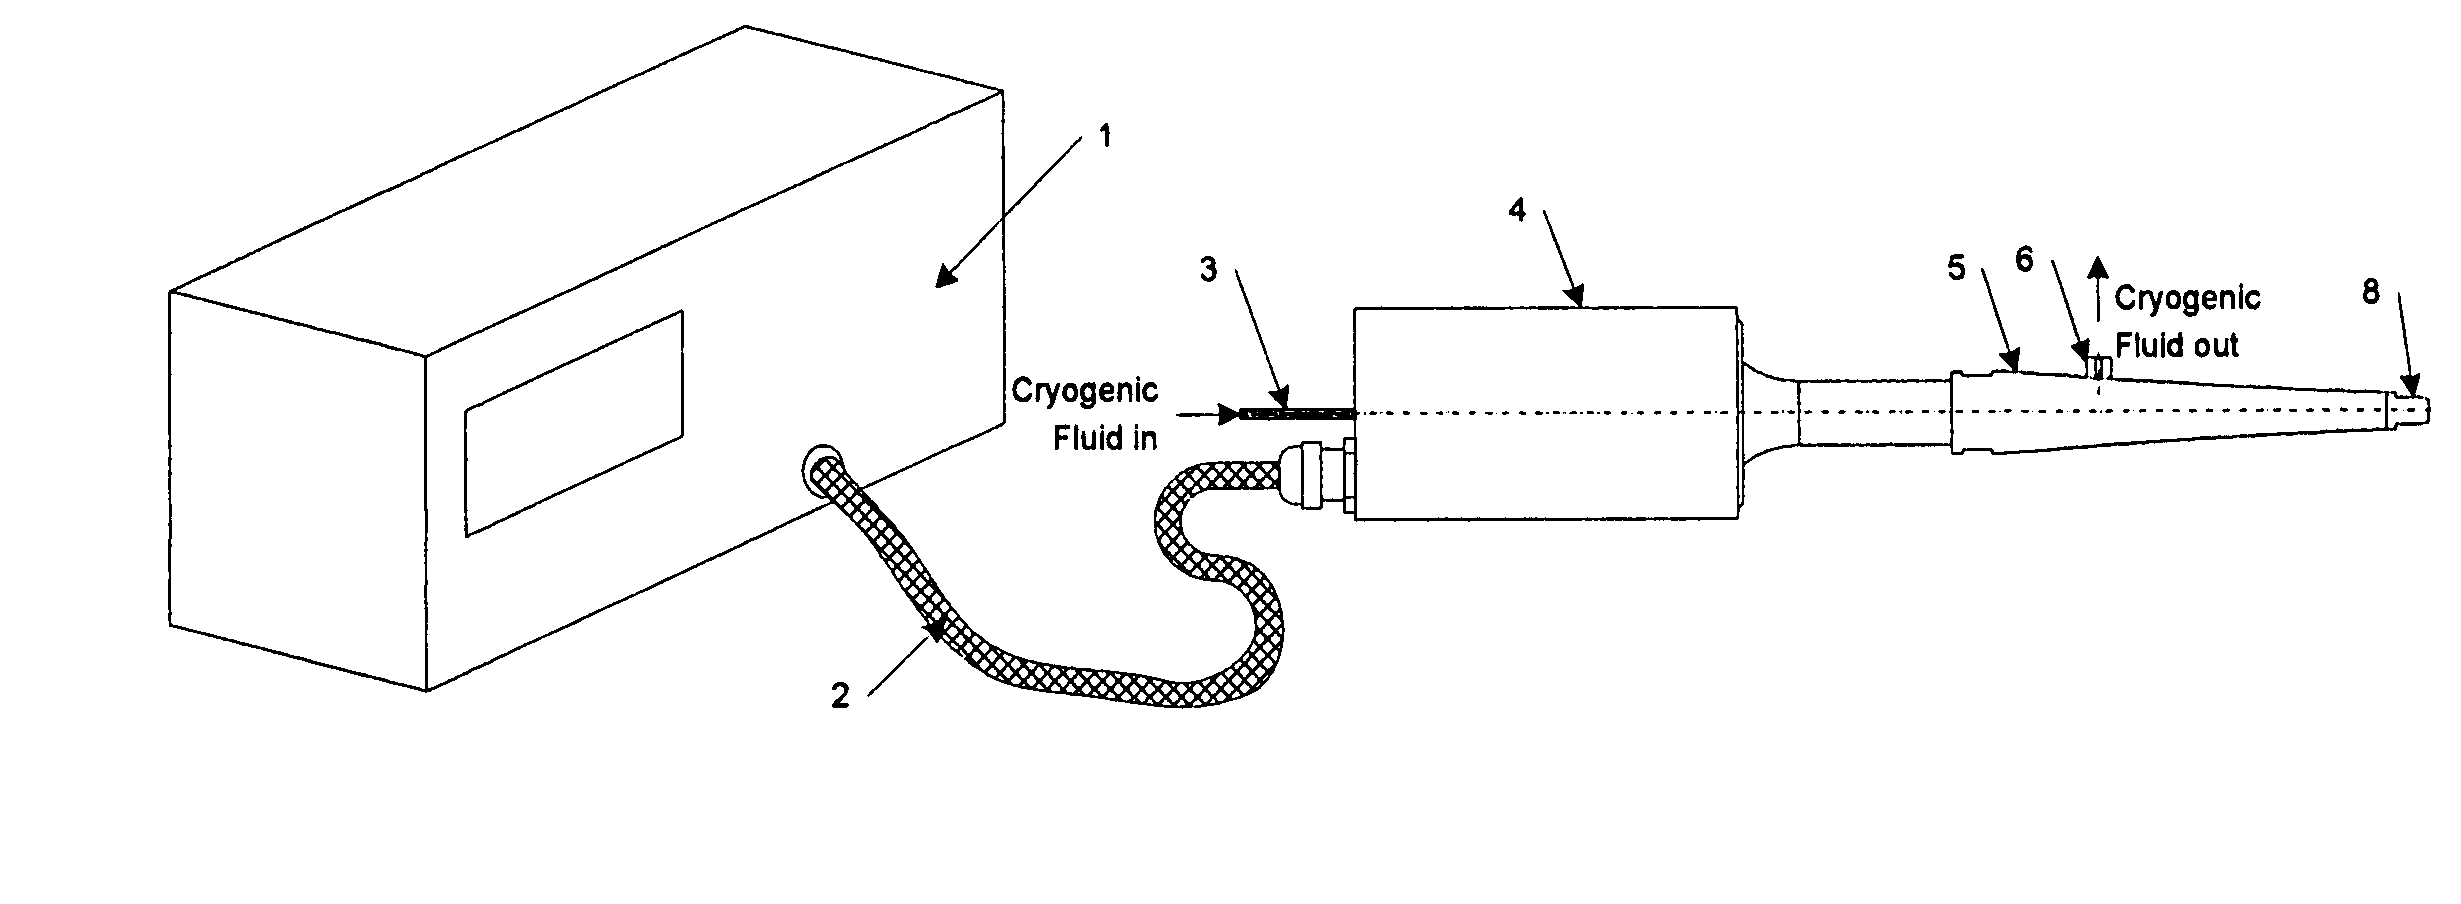 Apparatus and methods for pain relief using ultrasound waves in combination with cryogenic energy